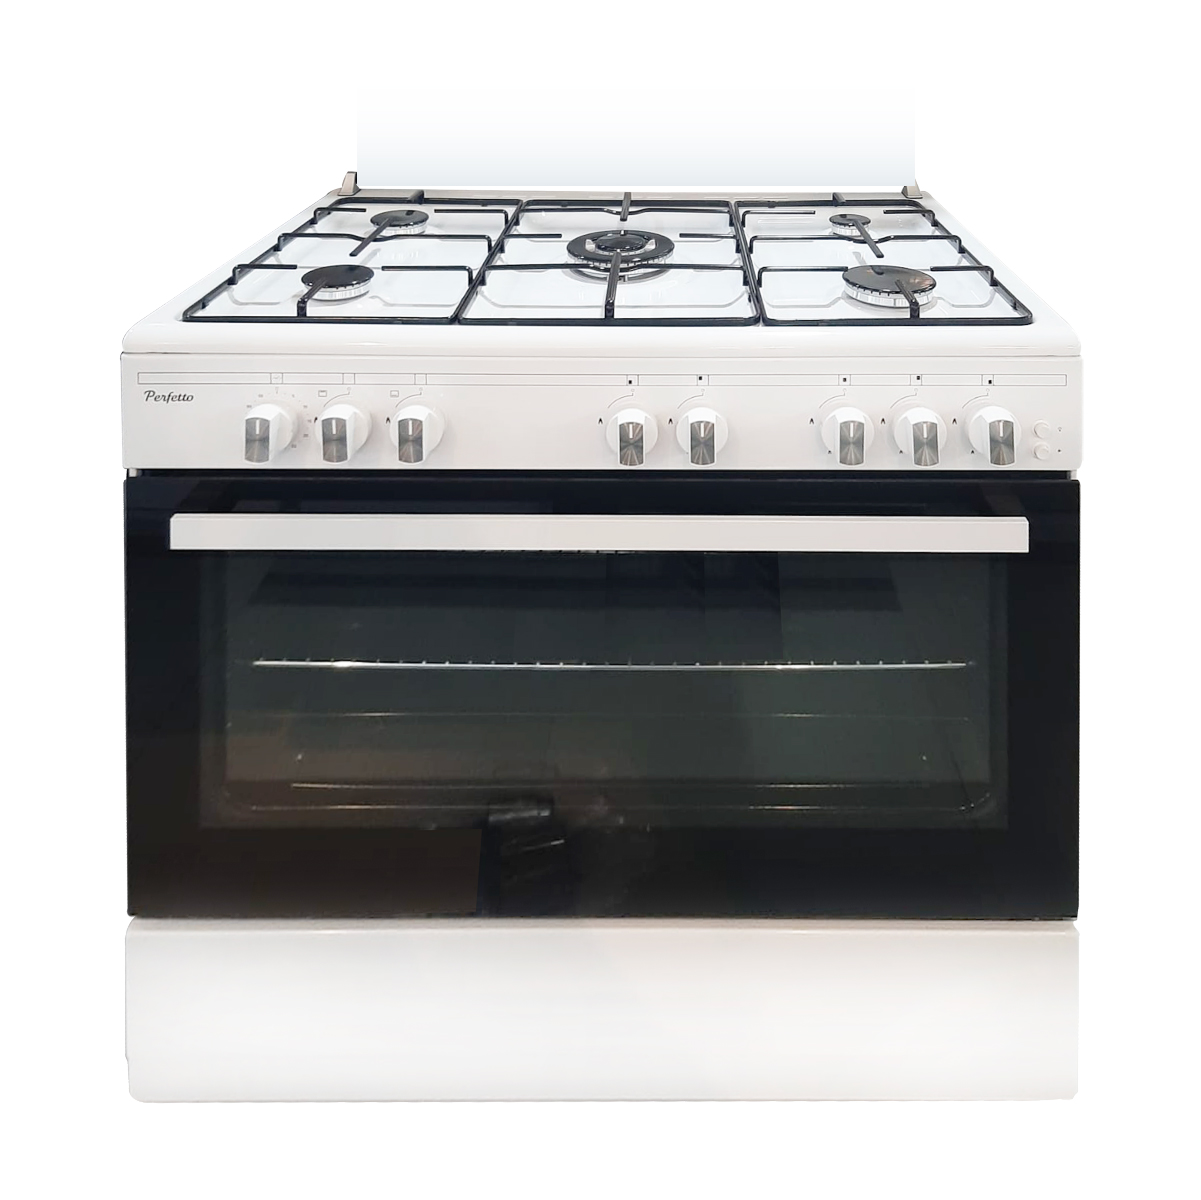 Perfetto Oven, 5 Burners, Ignition, Giant 90cm, White, PER95GIANT